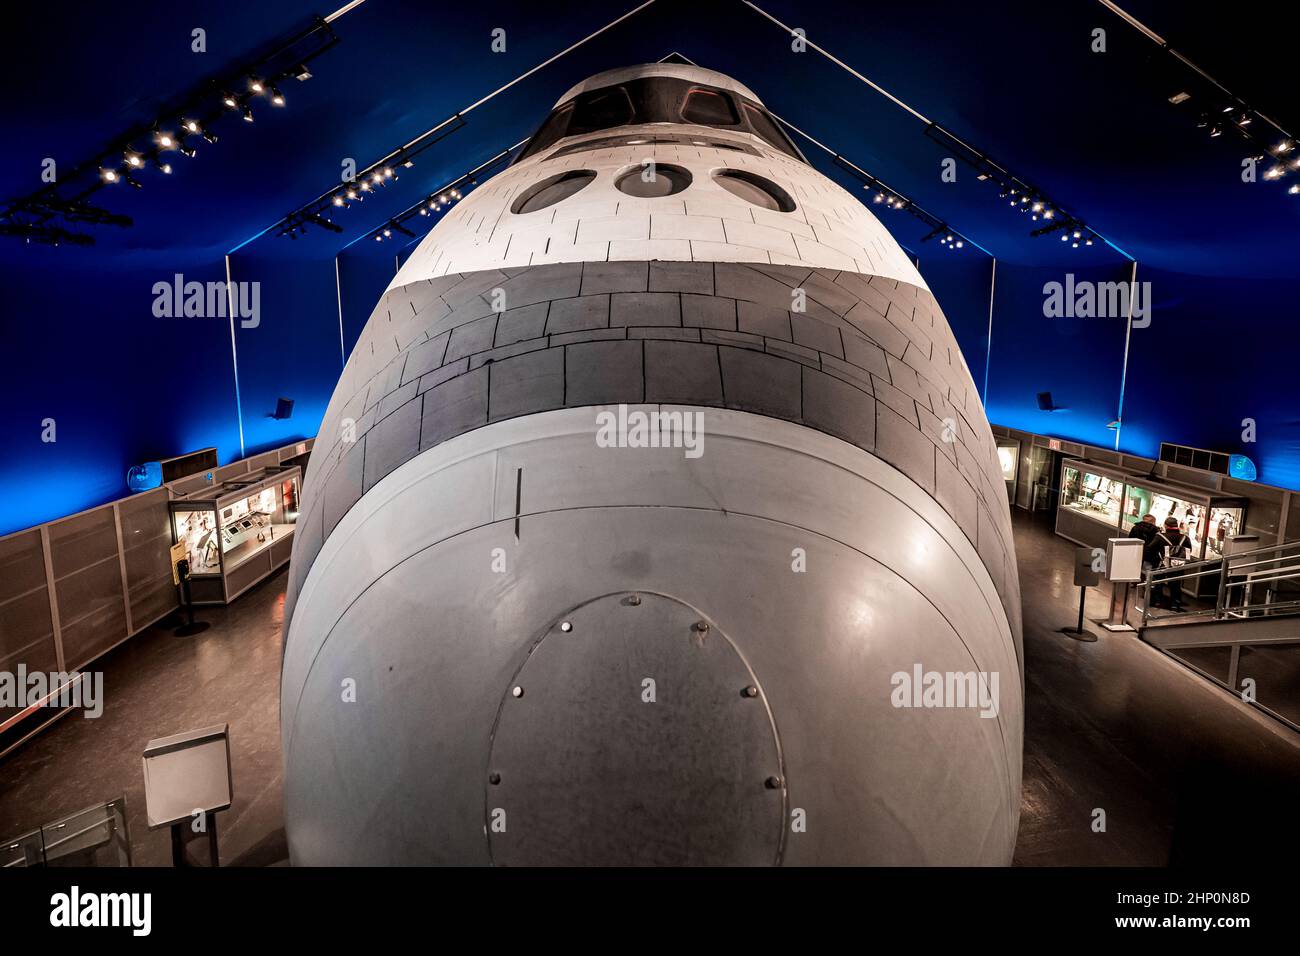 Frontal view of Space Shuttle Enterprise at the Shuttle Pavilion onboard of the USS Intrepid Sea, Air and Space Museum in New York City, NY, USA Stock Photo